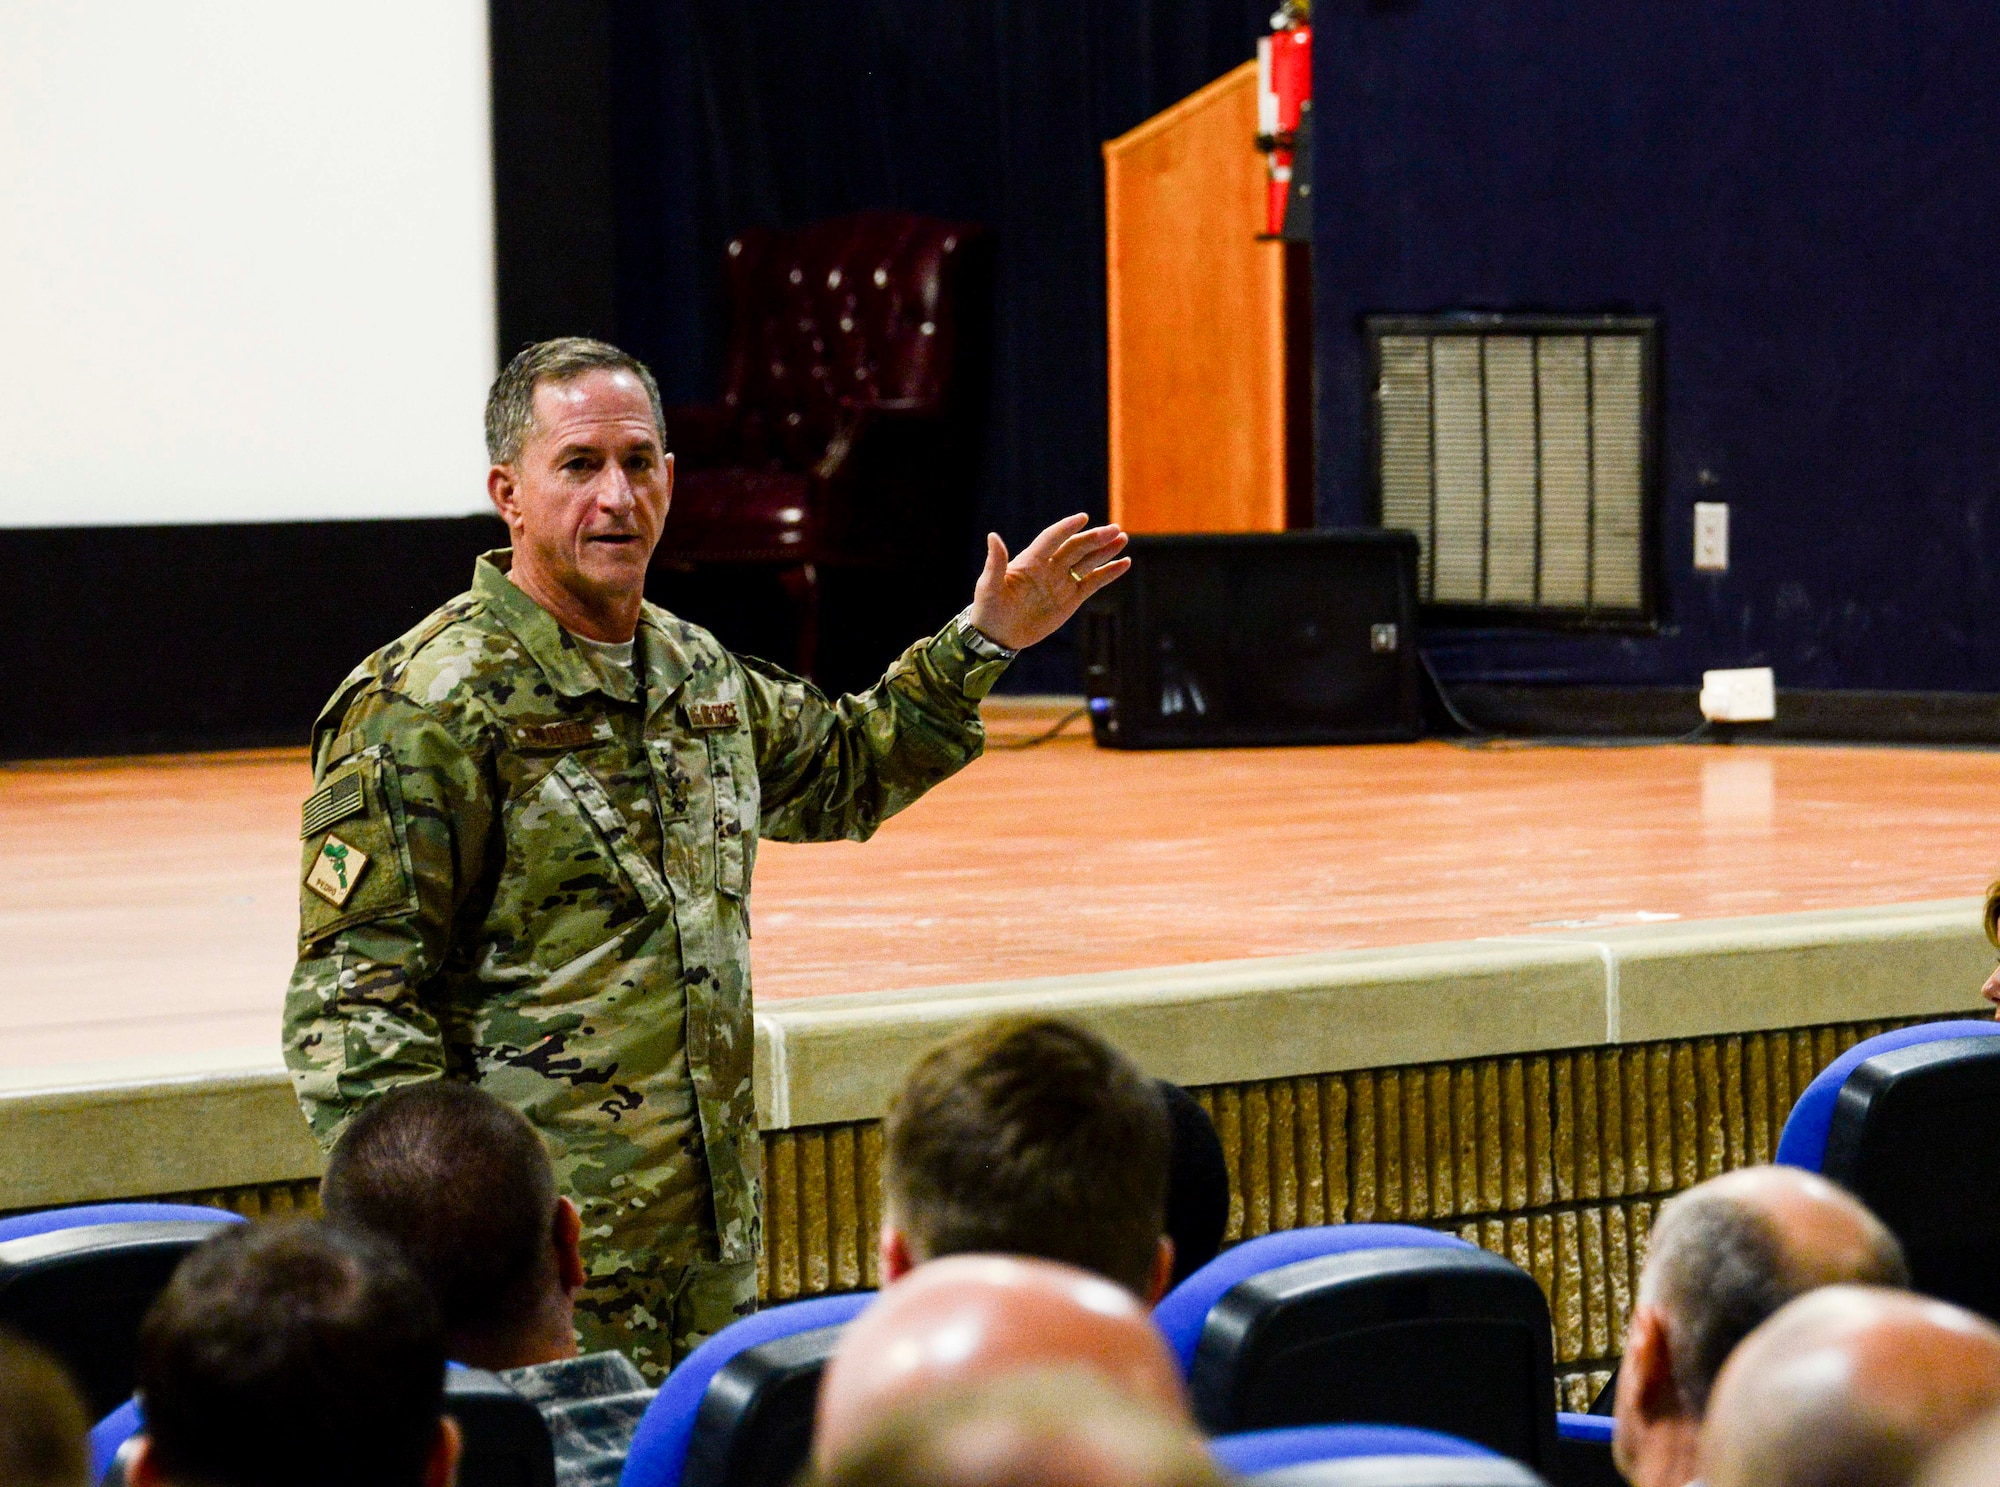 Chief of Staff of the Air Force Gen. David L. Goldfein speaks with Airmen during an all-call Aug. 14, 2016, at Al Udeid Air Base, Qatar. Goldfein visited Al Udeid to speak with deployed Airmen about his top priorities, the future of the Air Force and the Airmen’s role in the ongoing fight against terrorism. (U.S. Air Force photo/Senior Airman Janelle Patiño/Released)